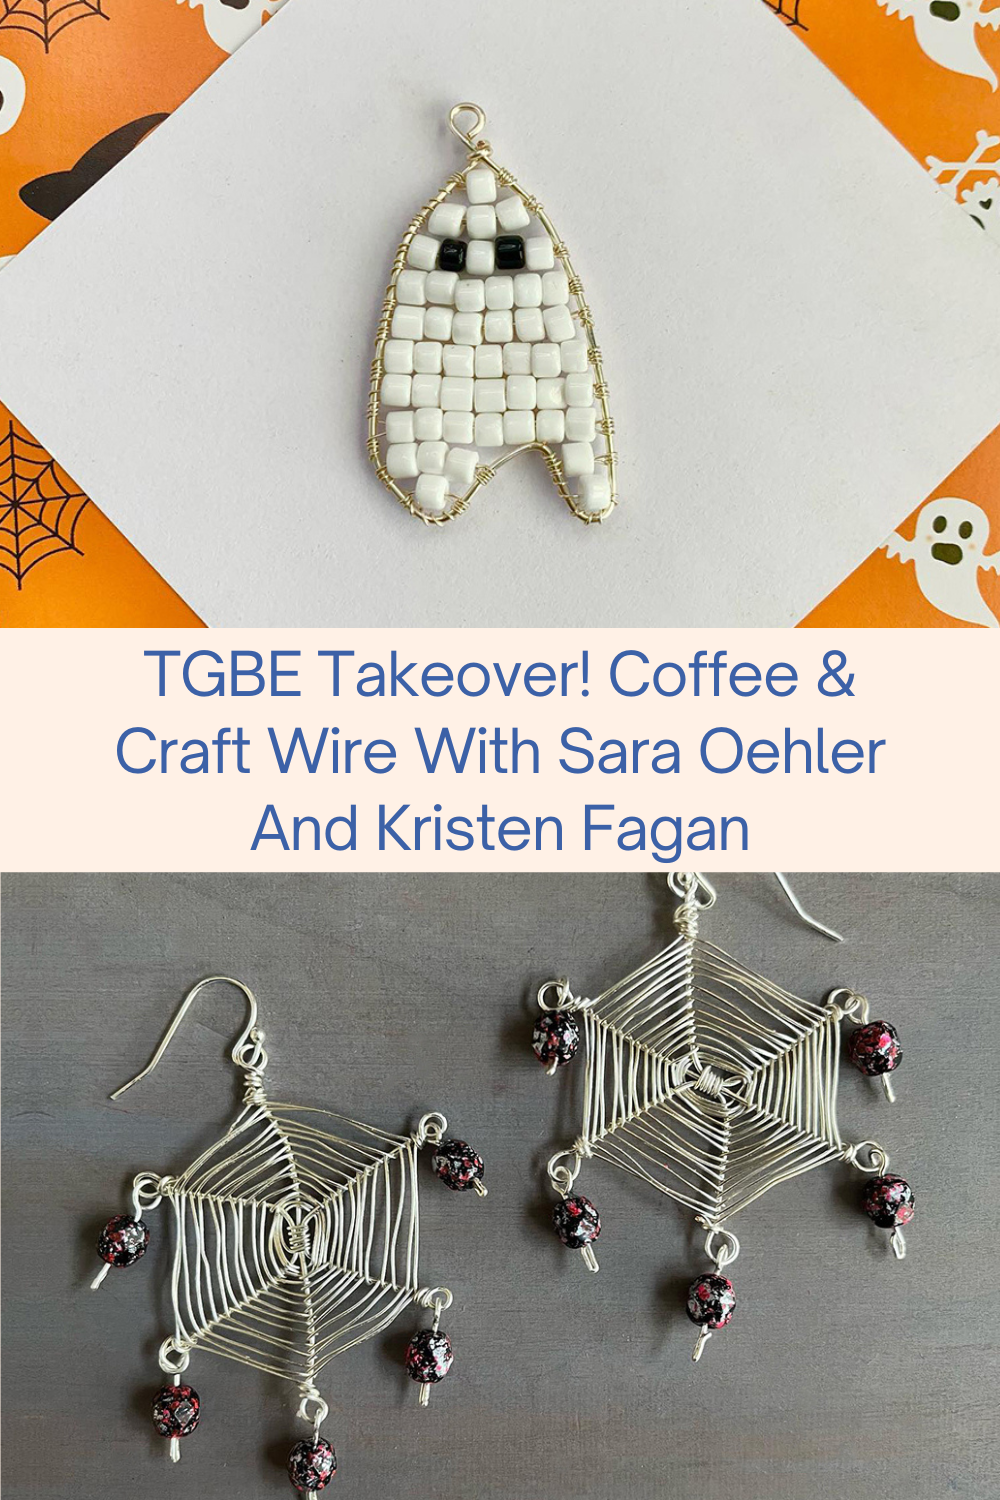 TGBE Takeover! Coffee & Craft Wire With Sara Oehler And Kristen Fagan Collage